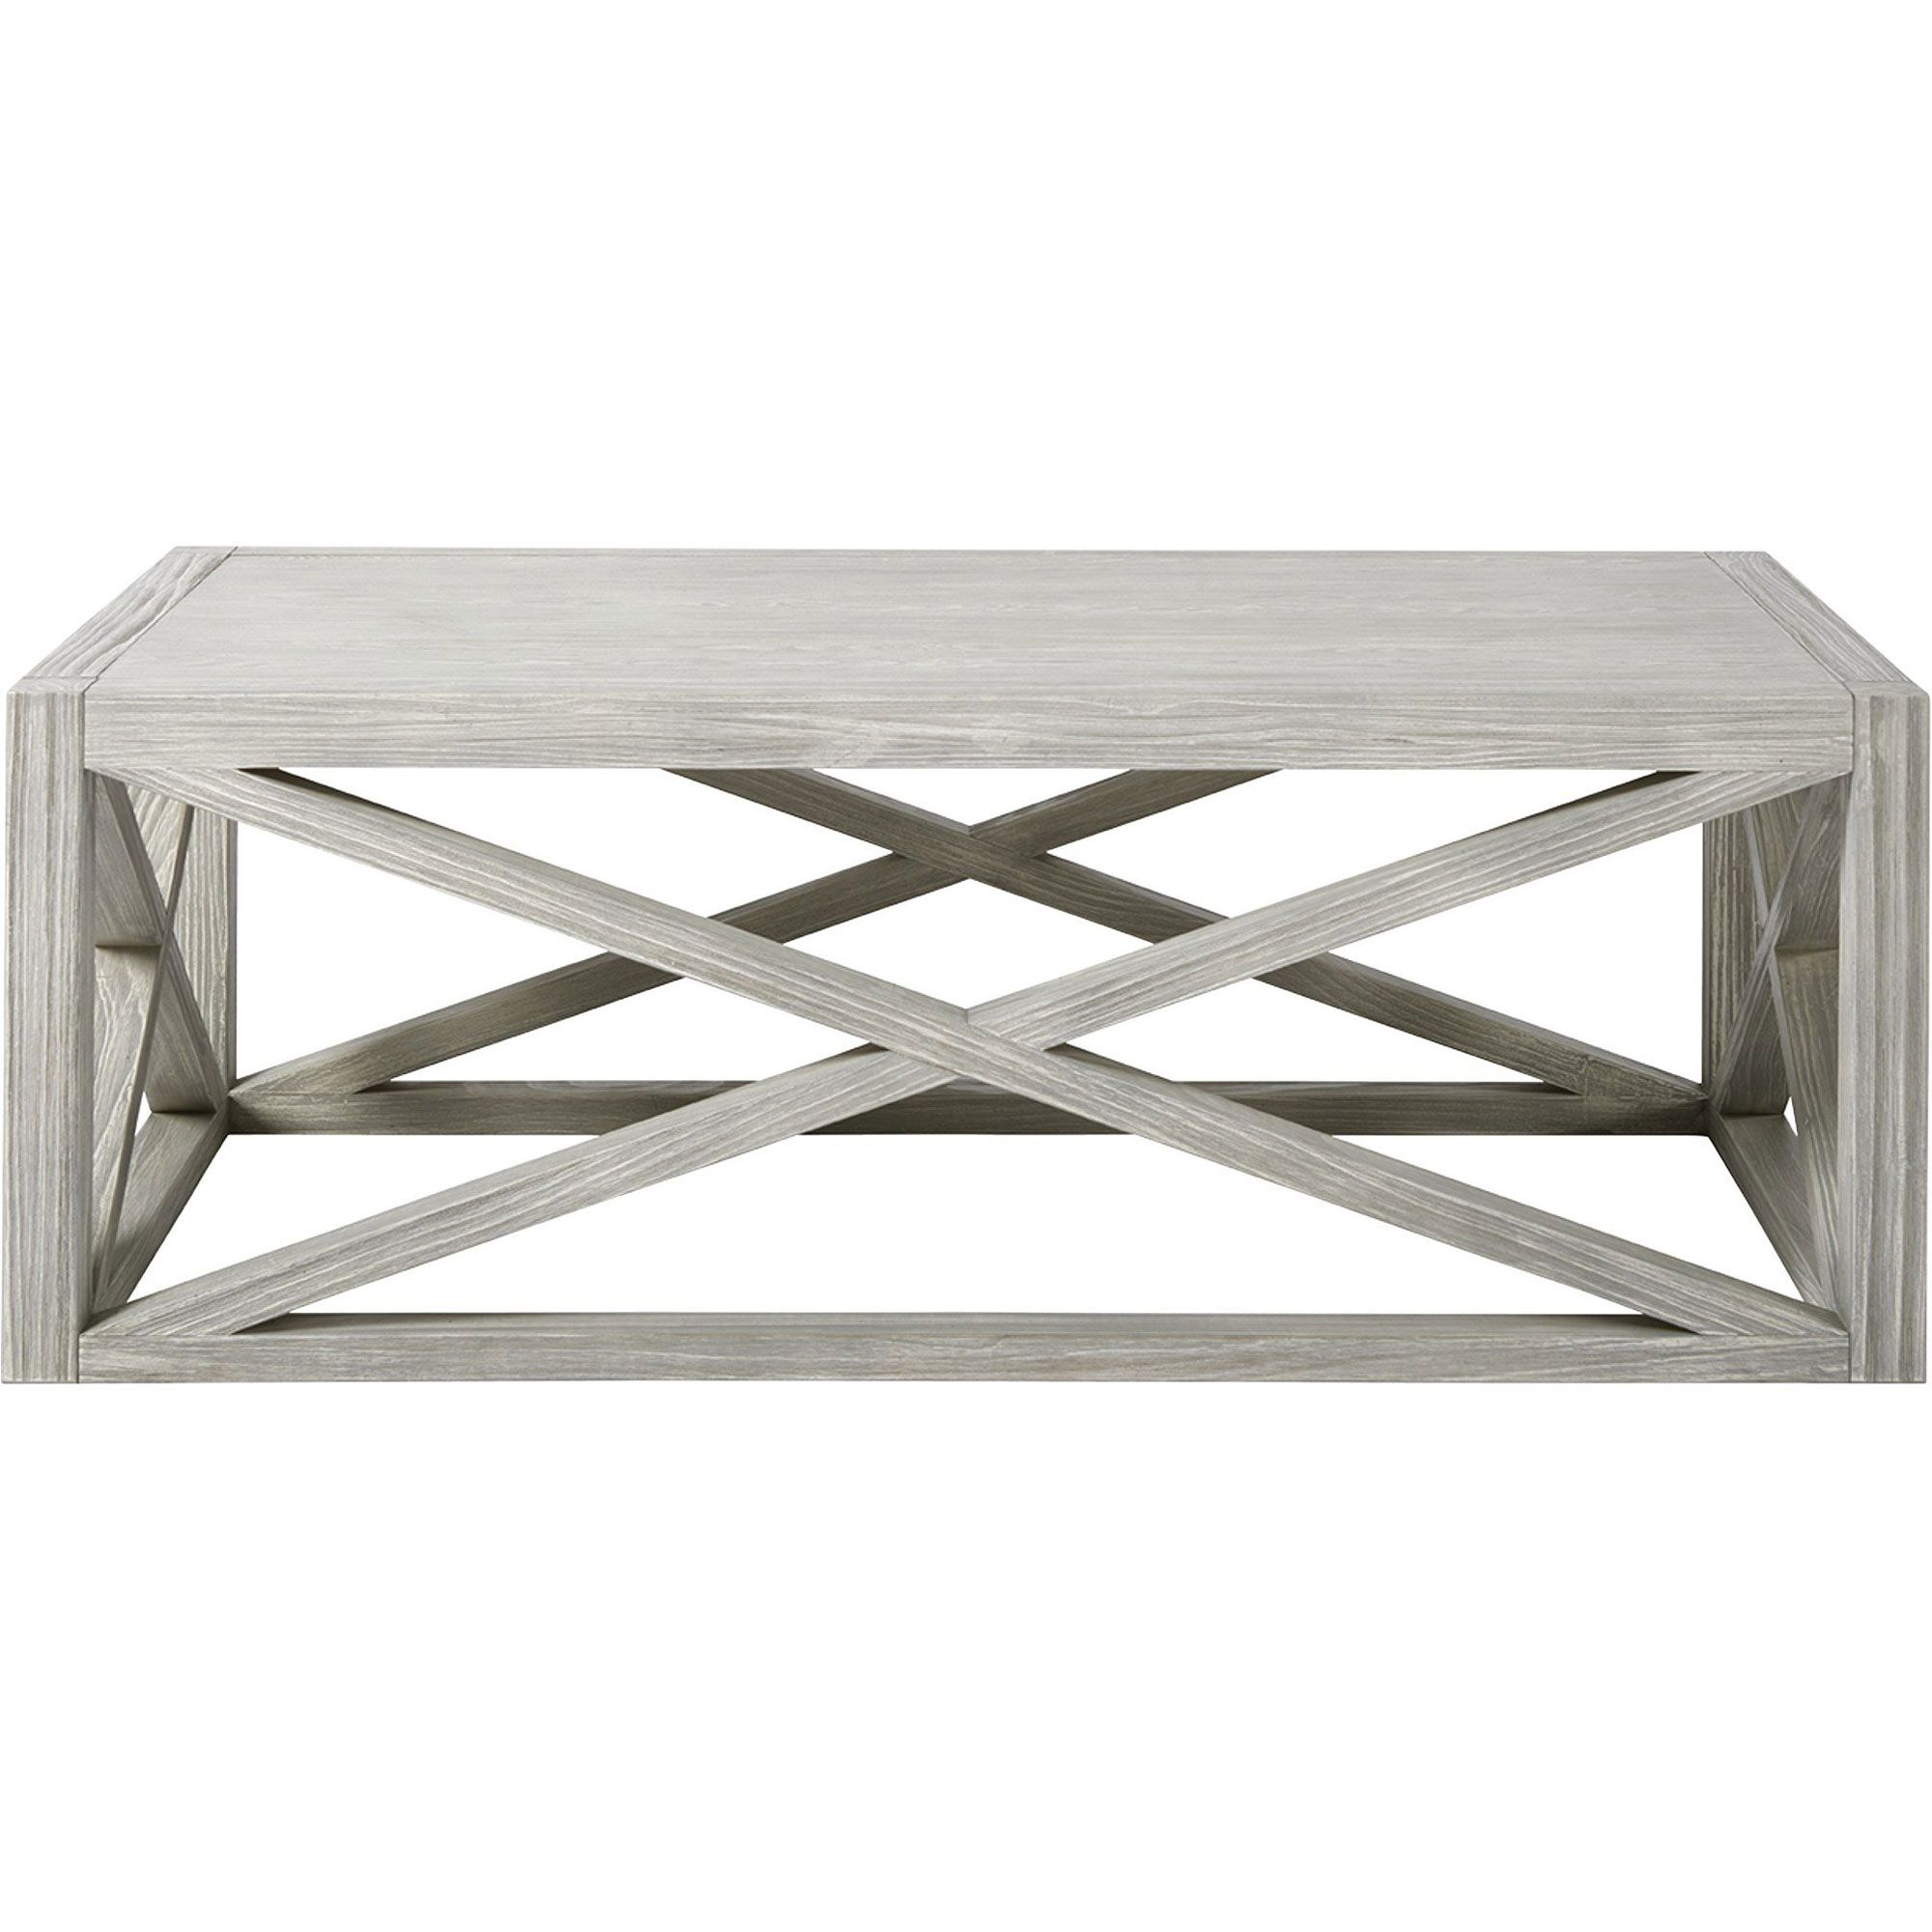 Escape Coastal Living Boardwalk Cocktail Table 833a801 – Furnishmyhome (View 8 of 15)